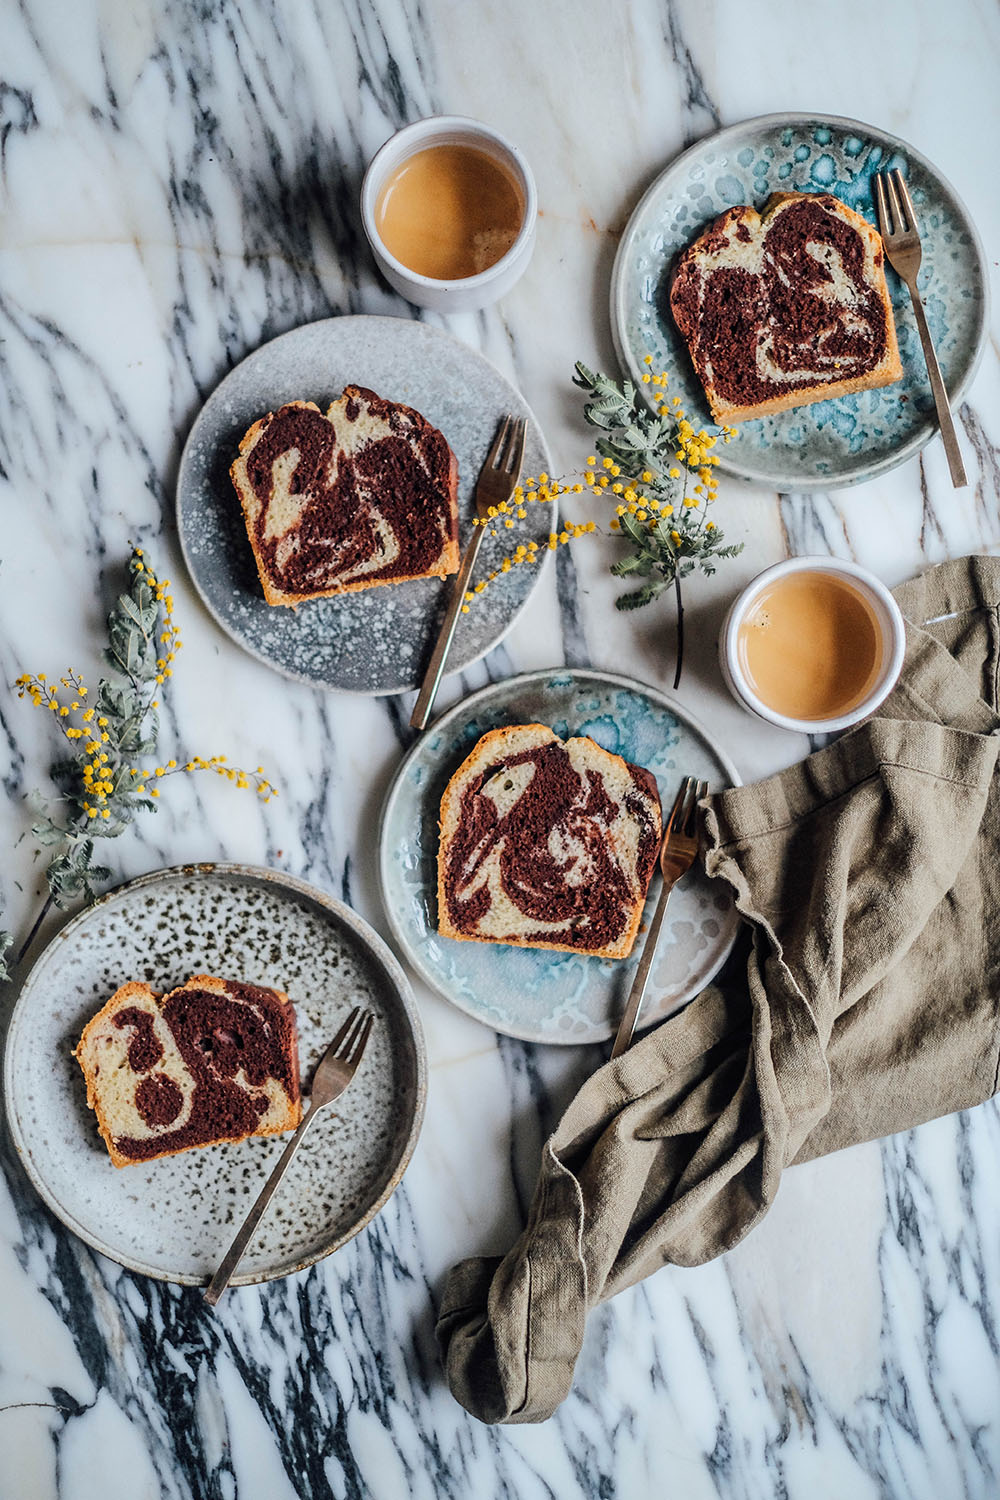 A simple Gluten-free Marble Cake